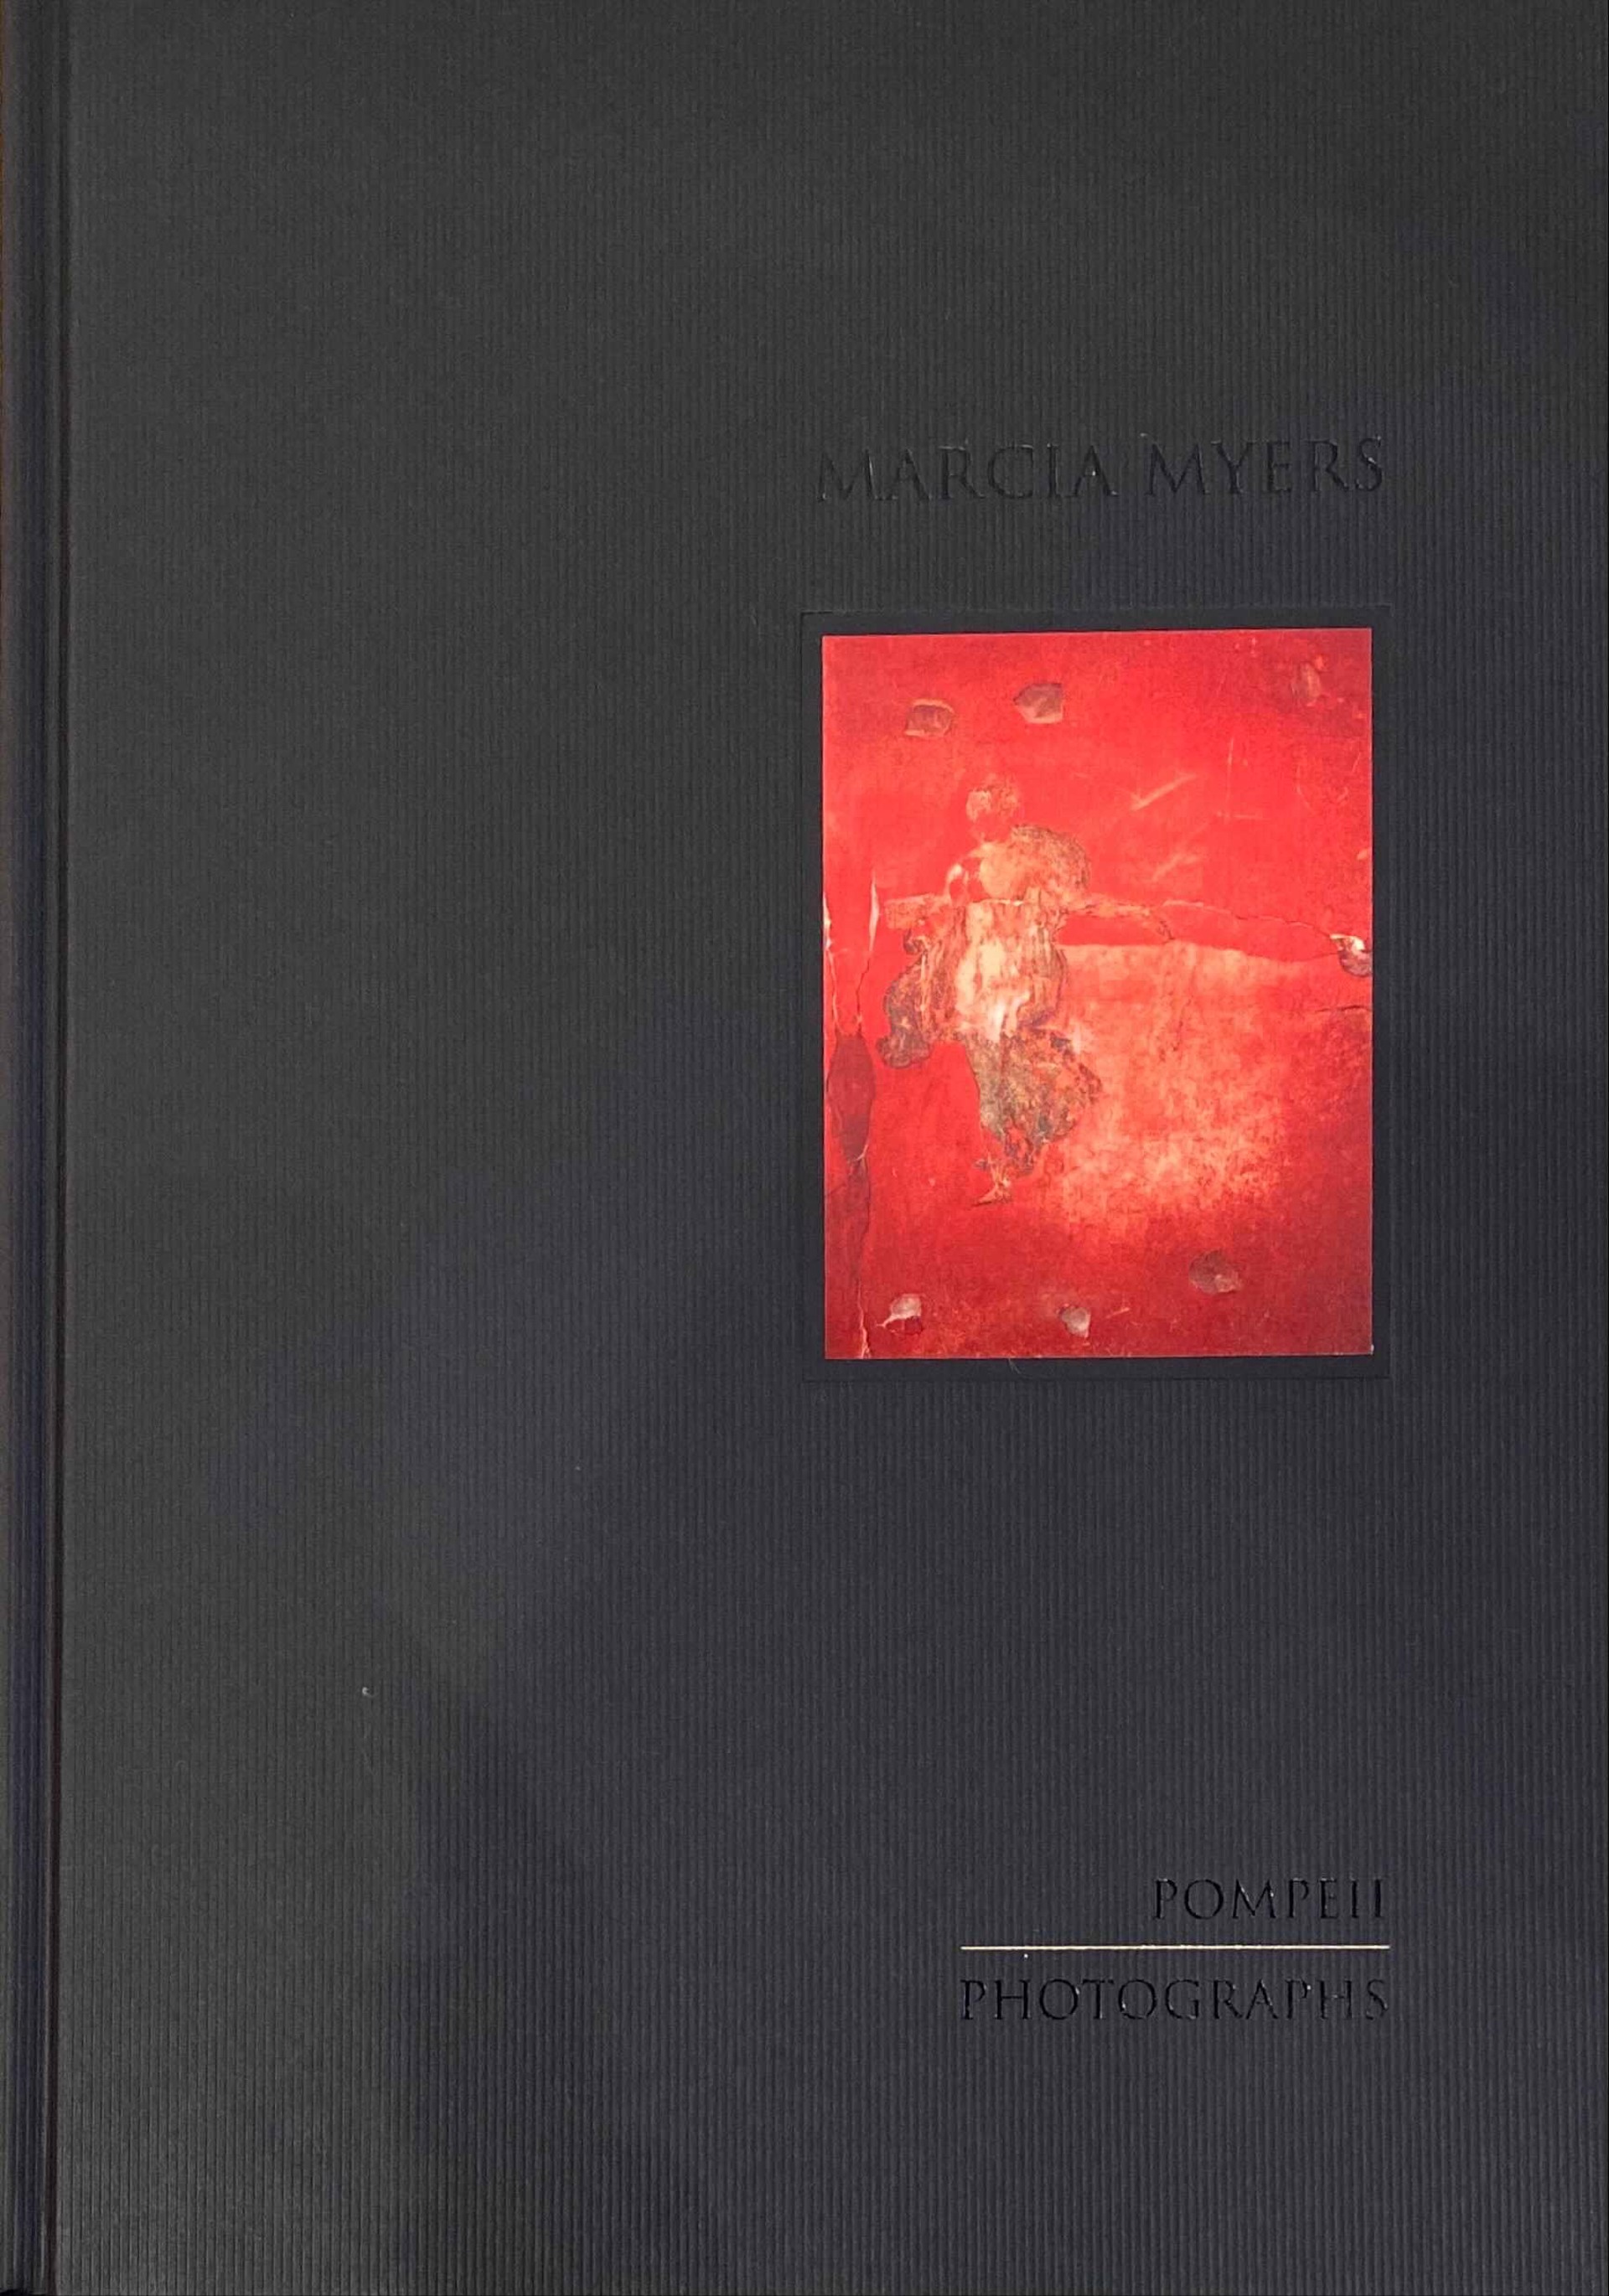 Book, Marcia Myers- Pompeii and the Cities of Vesuvius by Marcia Myers